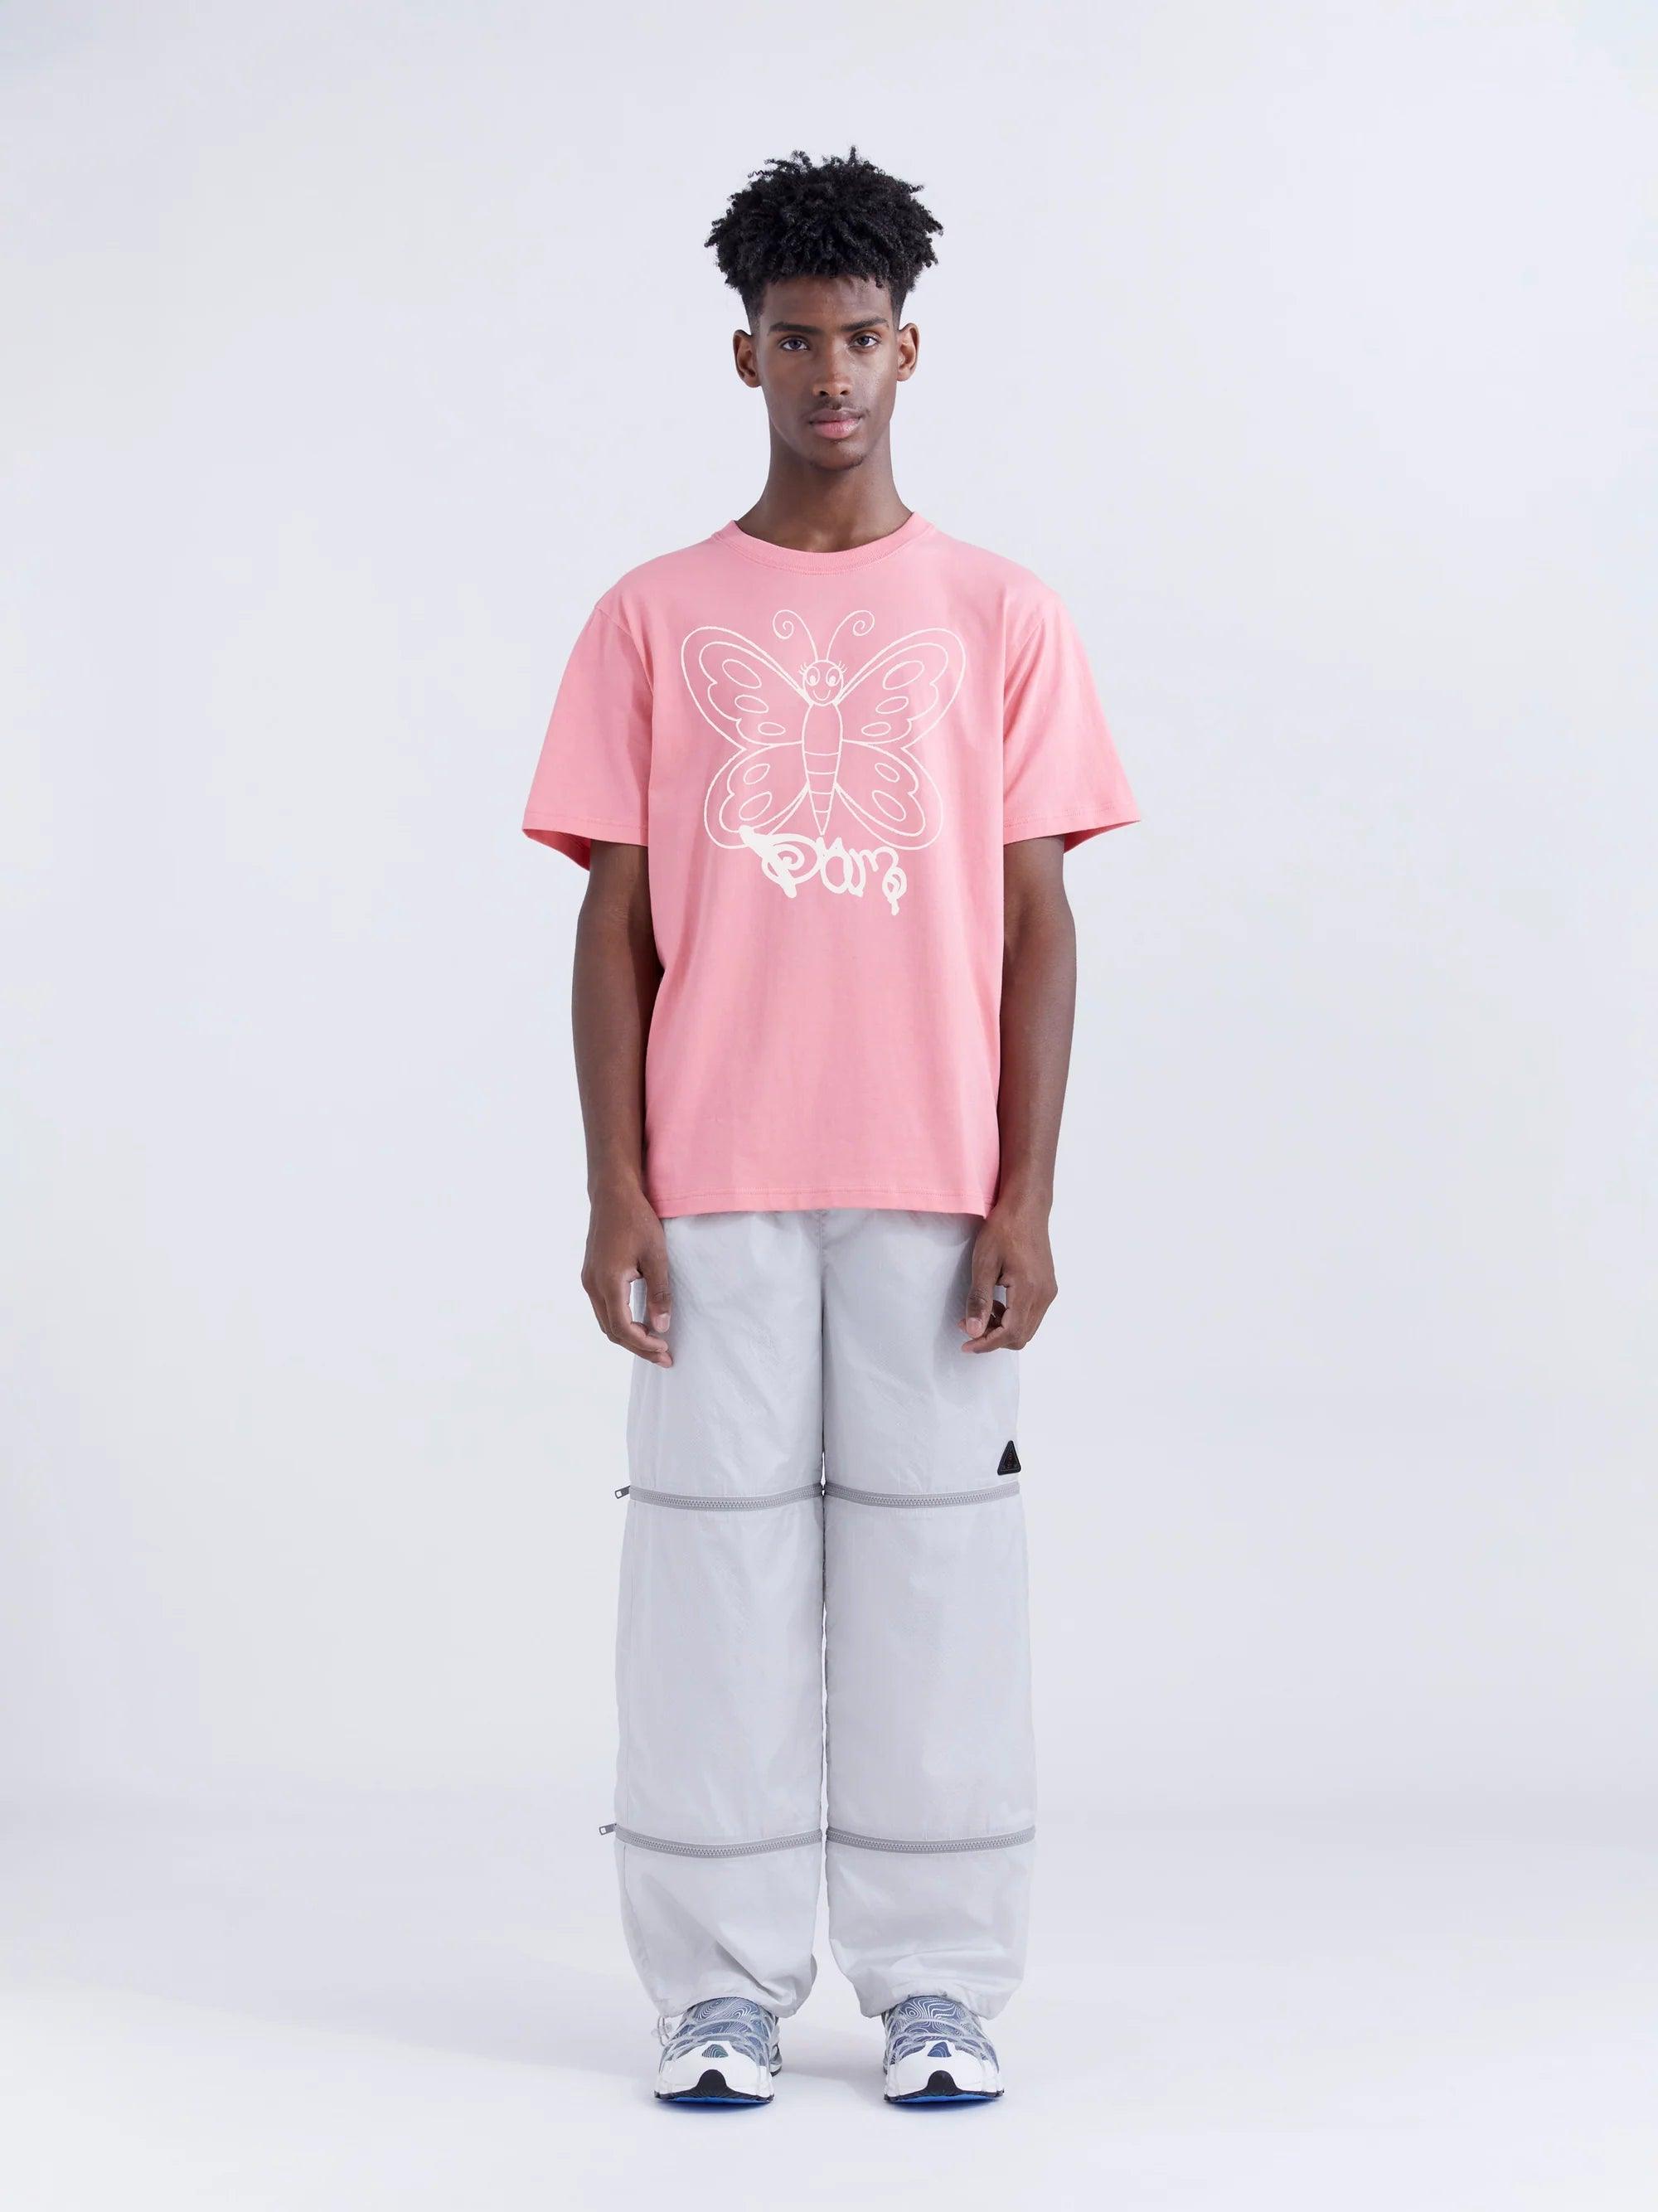 PAM / Perks and Mini VARG 2.0 Flutter SS Tee - Sugar Coral - SUPERCONSCIOUS BERLIN